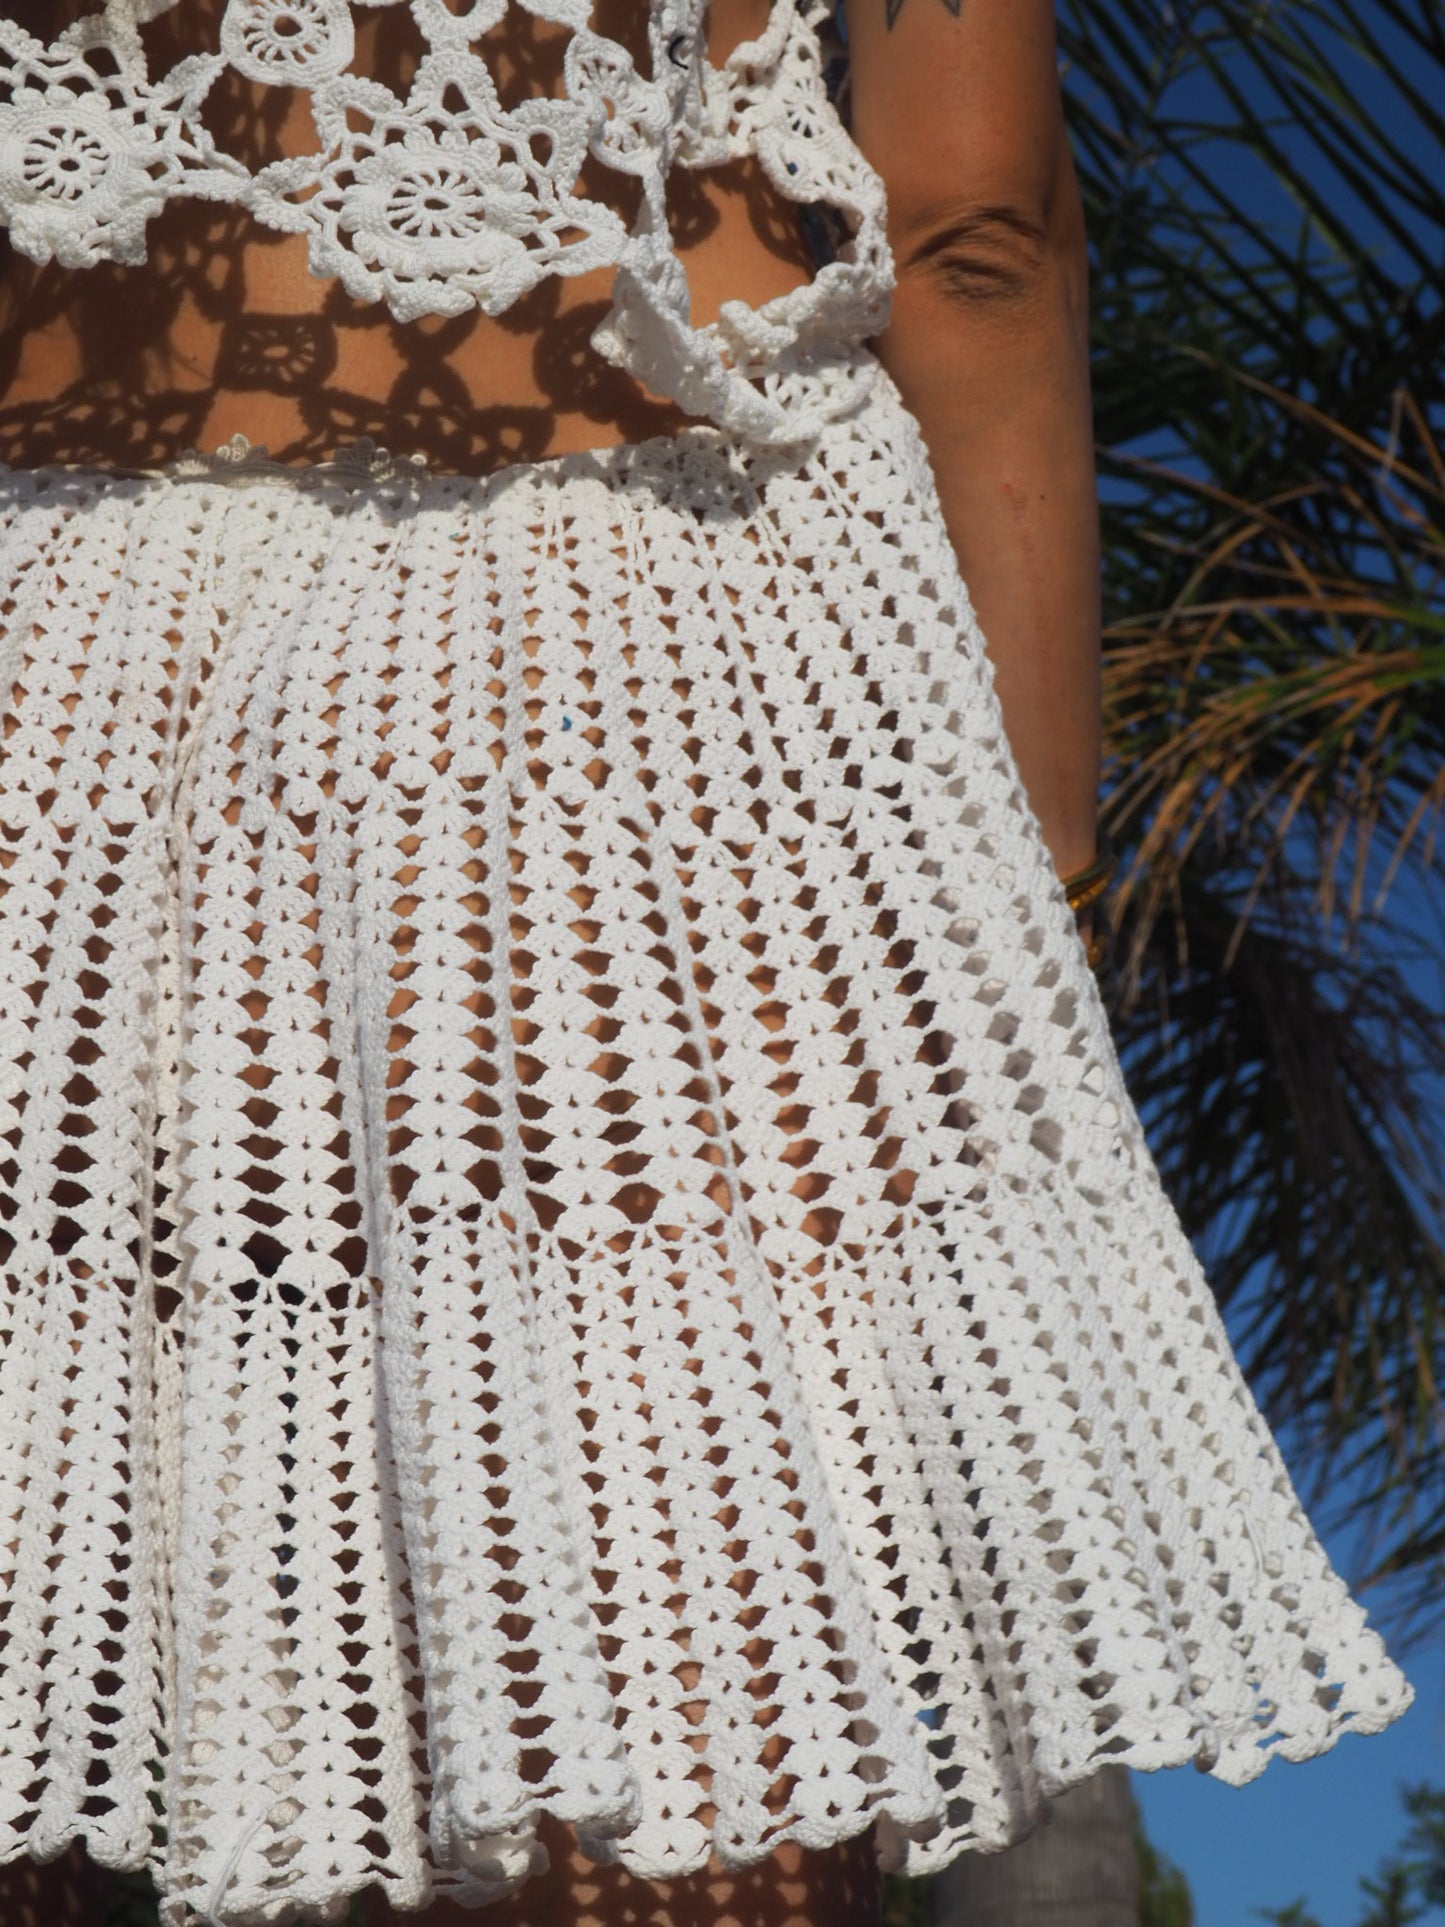 Antique white lace crochet textiles skirt up-cycled by Vagabond Ibiza